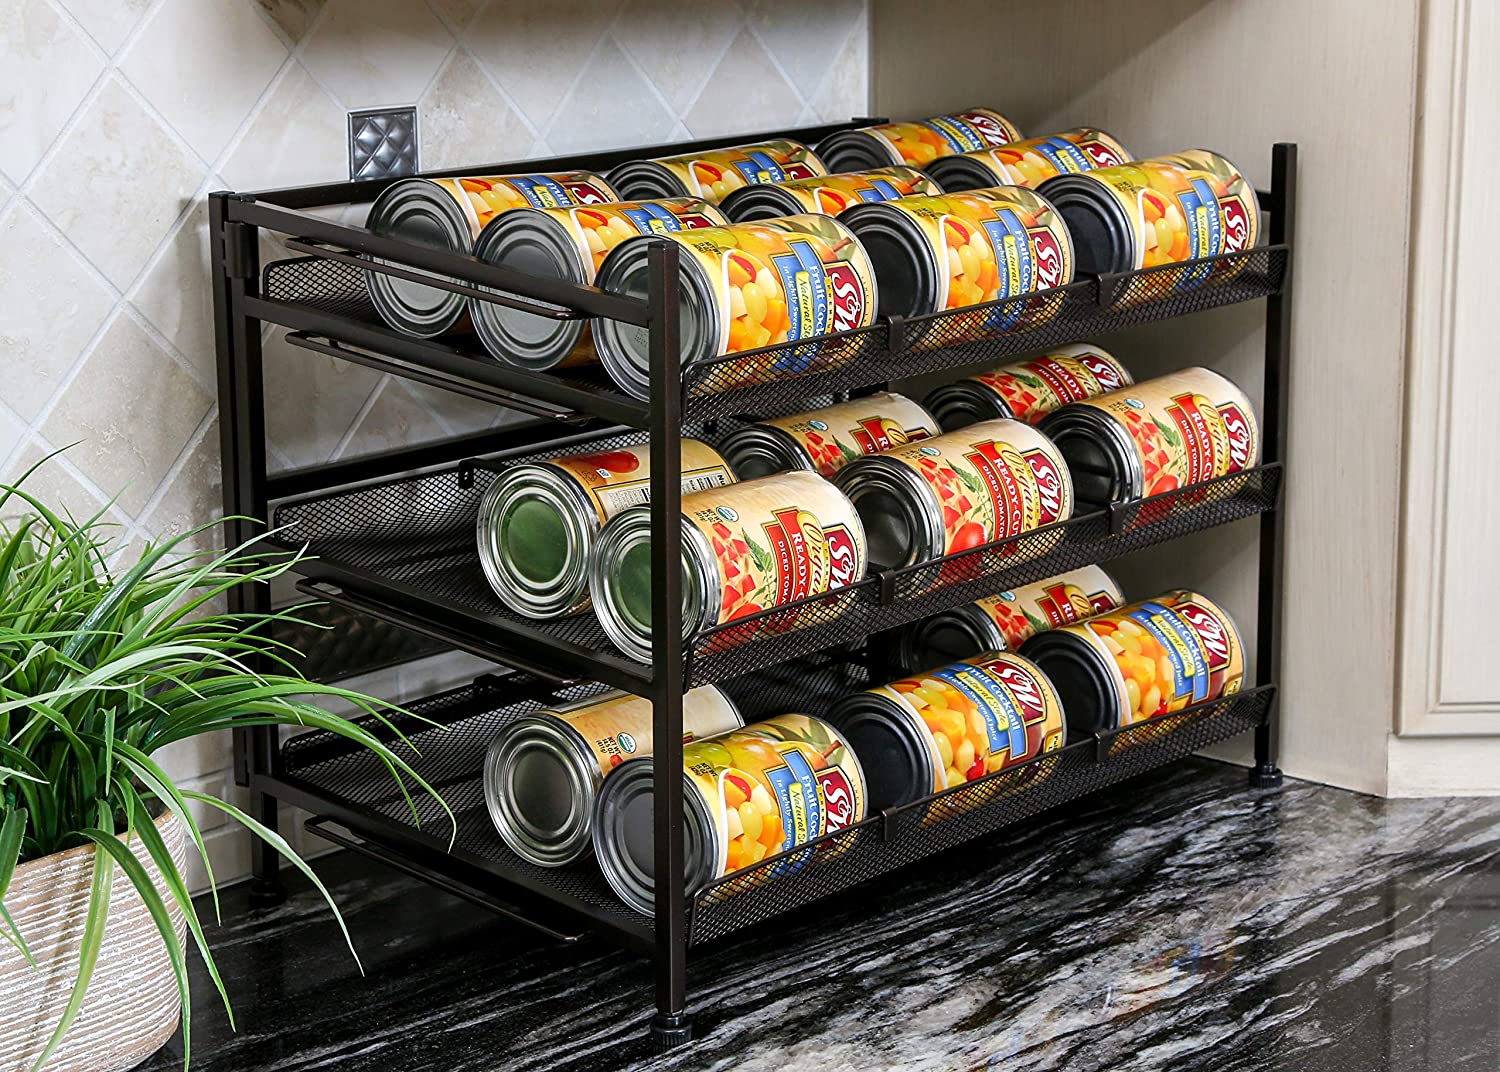 3-Tier Canned Food Organizer